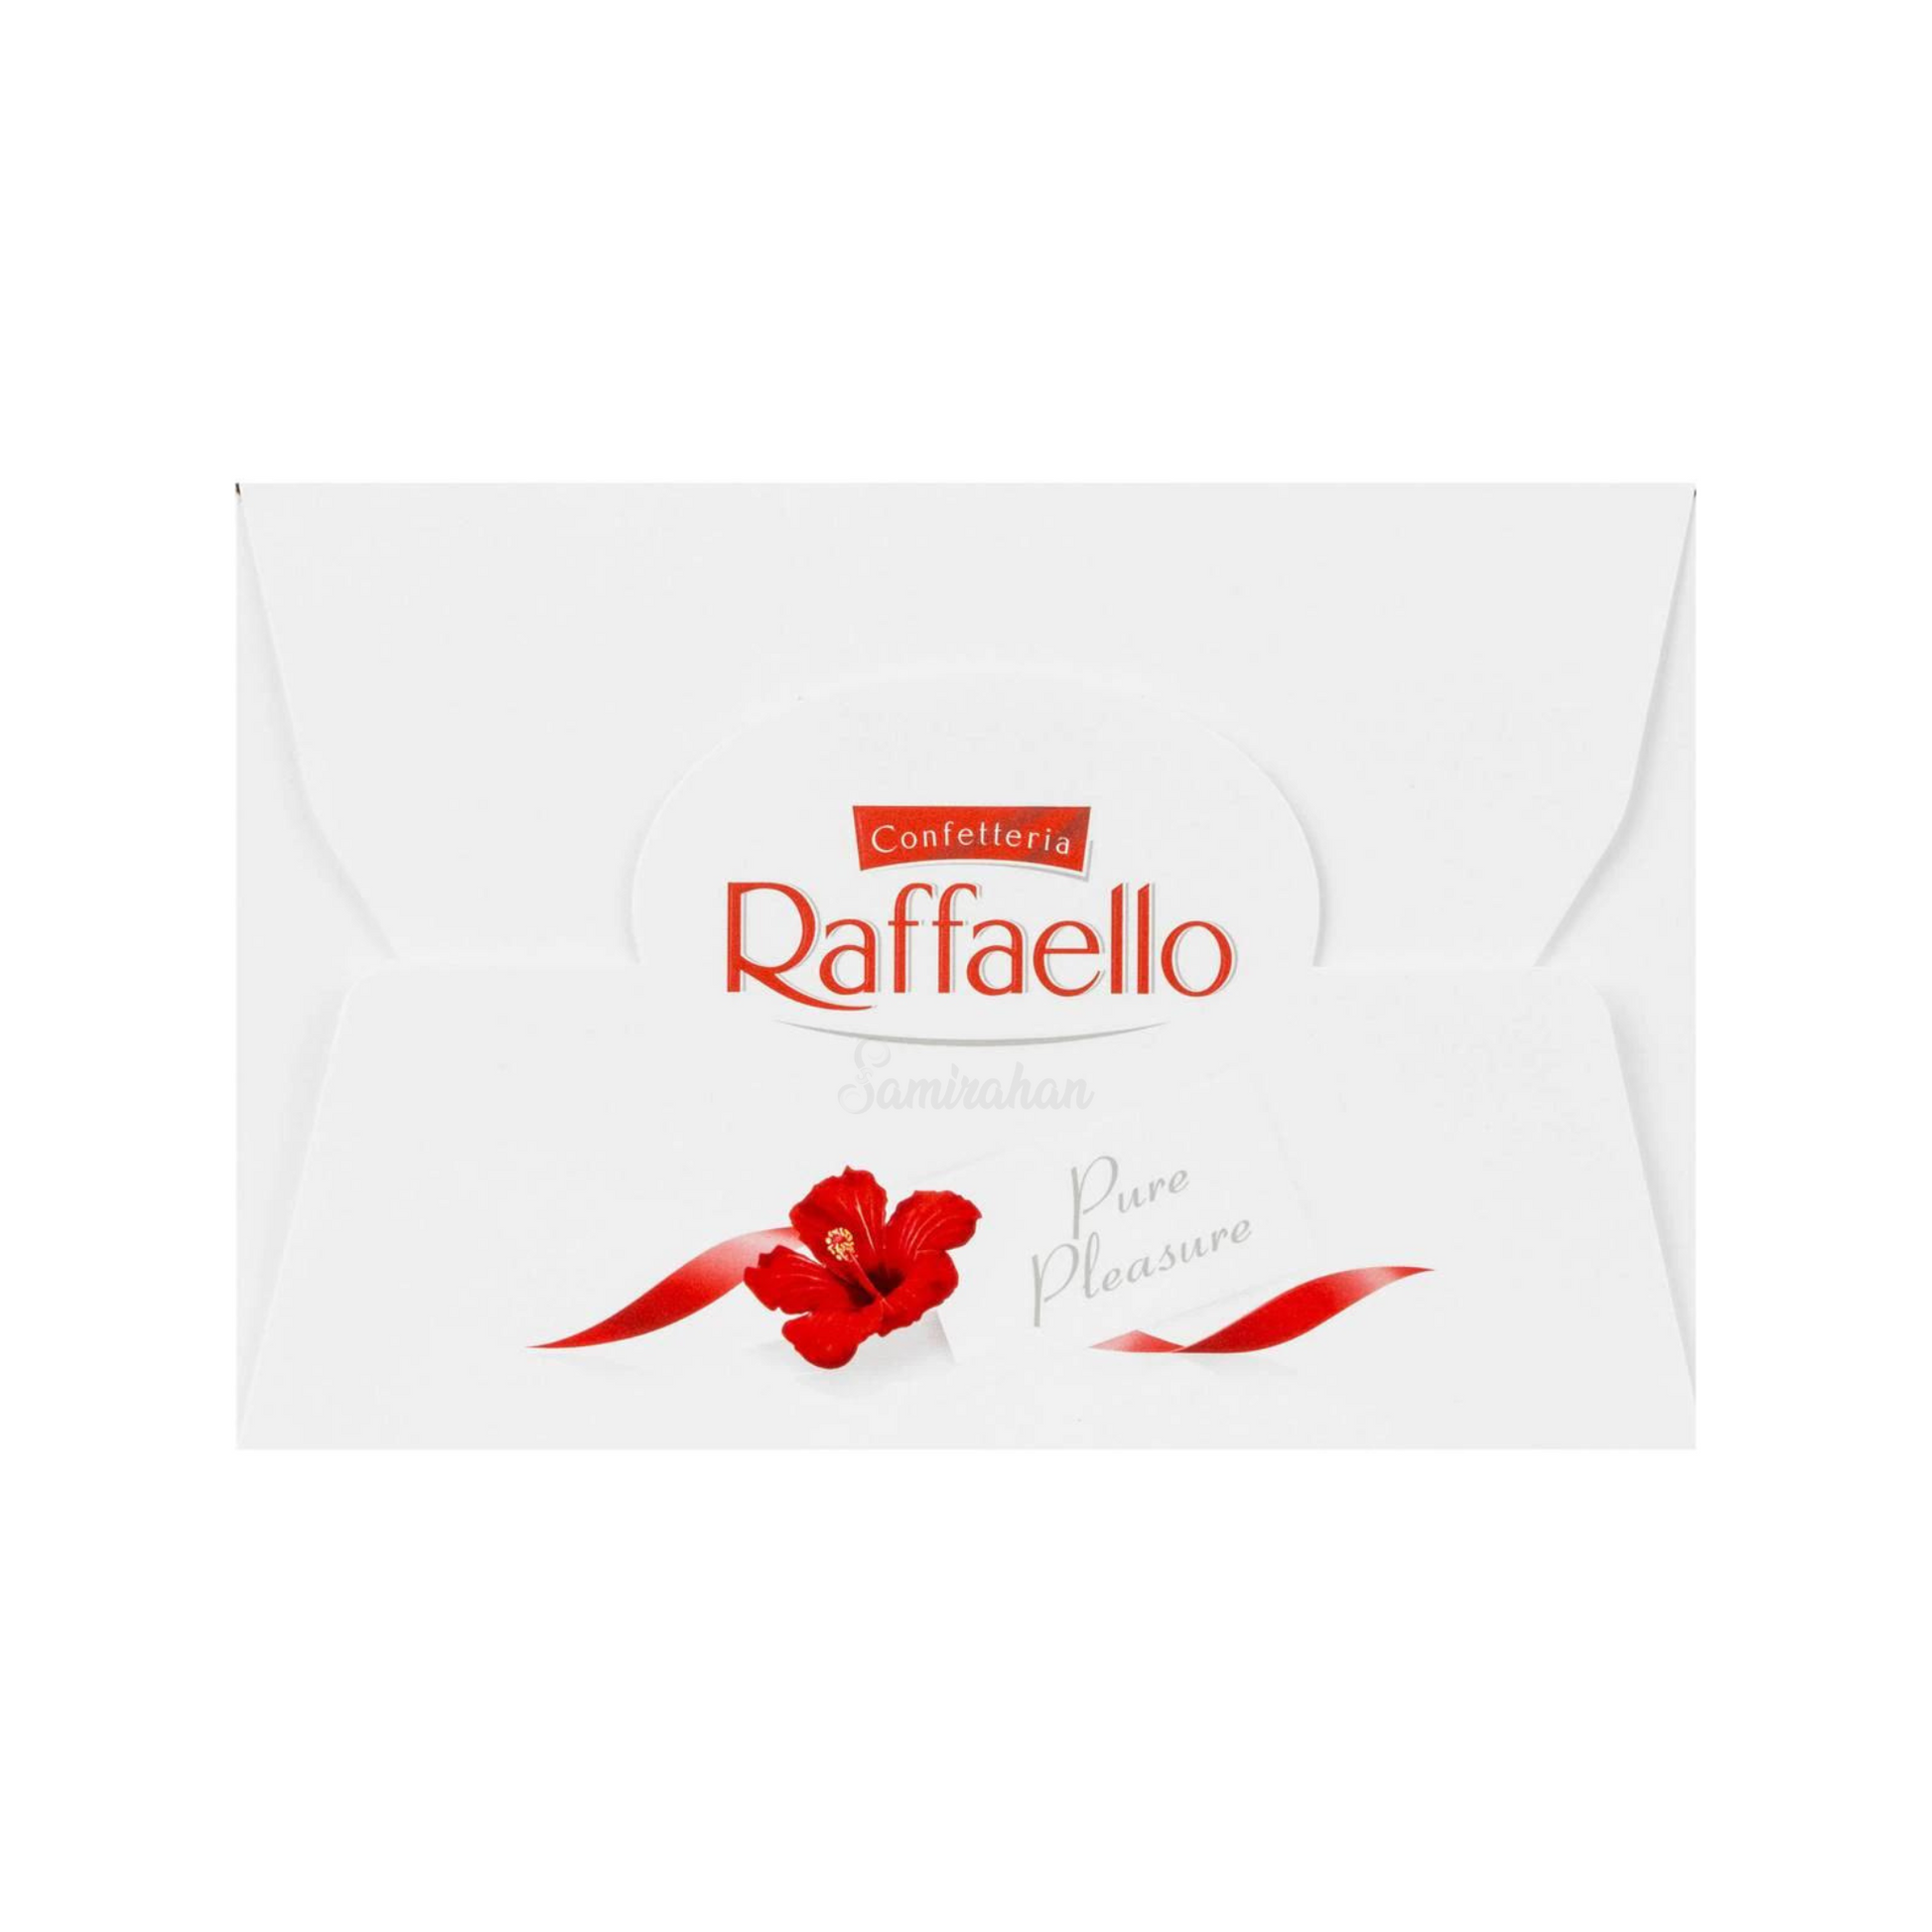 Raffaello Gift Box Ballotin is a precious heart of white almond enveloped in a delicious creamy filling, all enclosed in a crispy wafer shell scattered with fragrant coconut flakes. Best imported foreign Australian Aussie genuine authentic premium sweets gift idea candy real snack cheap price in Dhaka Bangladesh.